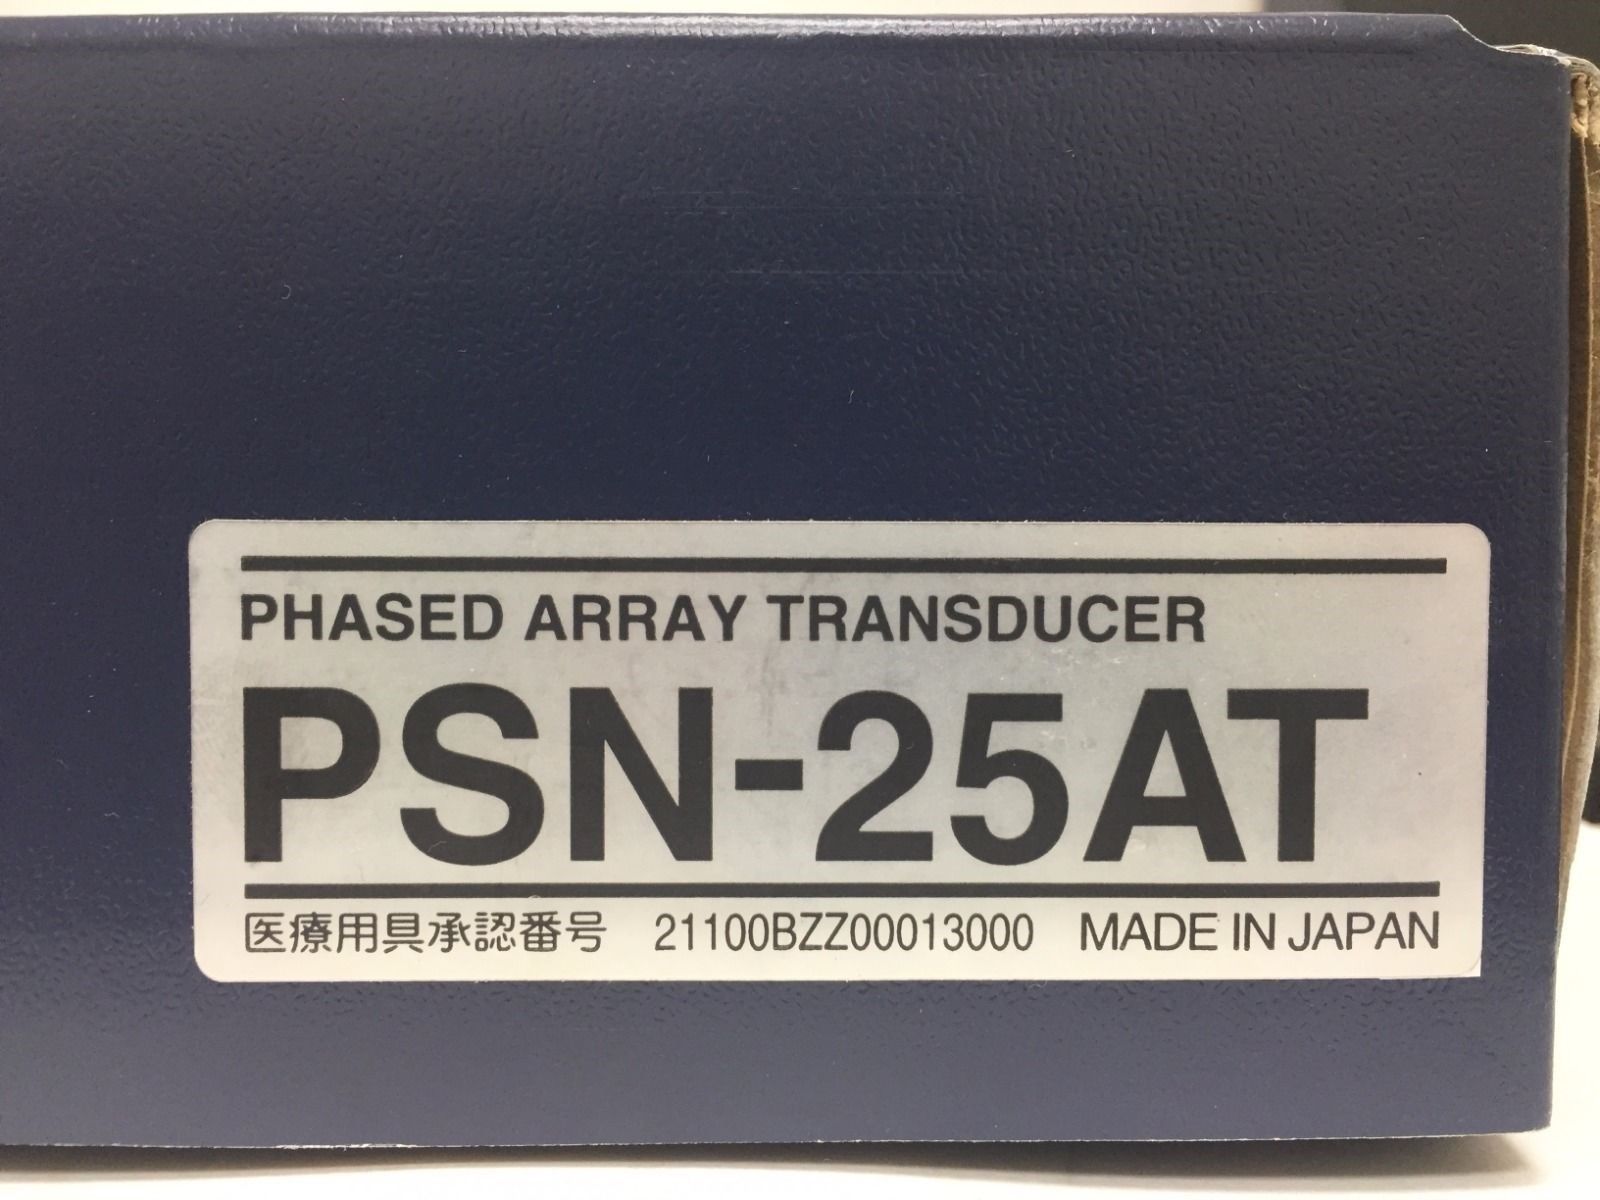 Toshiba PSN-25AT Phased Array 2.5 MHz Transducer Probe Ultrasound Equipment DIAGNOSTIC ULTRASOUND MACHINES FOR SALE